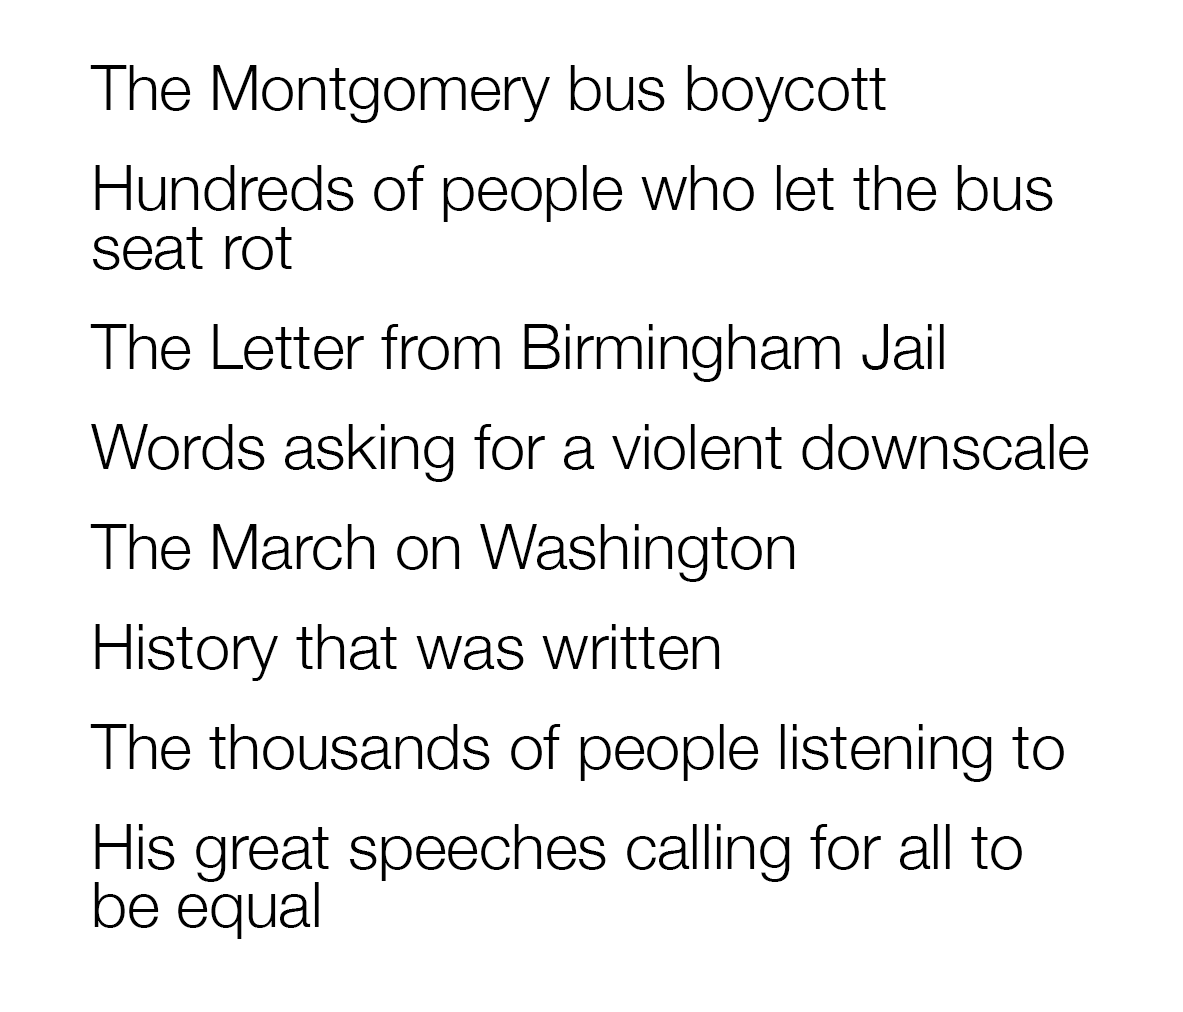 Contest submission titled "Do you remember Dr. Martin Luther King Jr.?" A poem that reads "The Montgomery bus boycott
Hundreds of people who let the bus seat rot
The Letter from Birmingham Jail
Words asking for a violent downscale
The March on Washington
History that was written
The thousands of people listening to
His great speeches calling for all to be equal